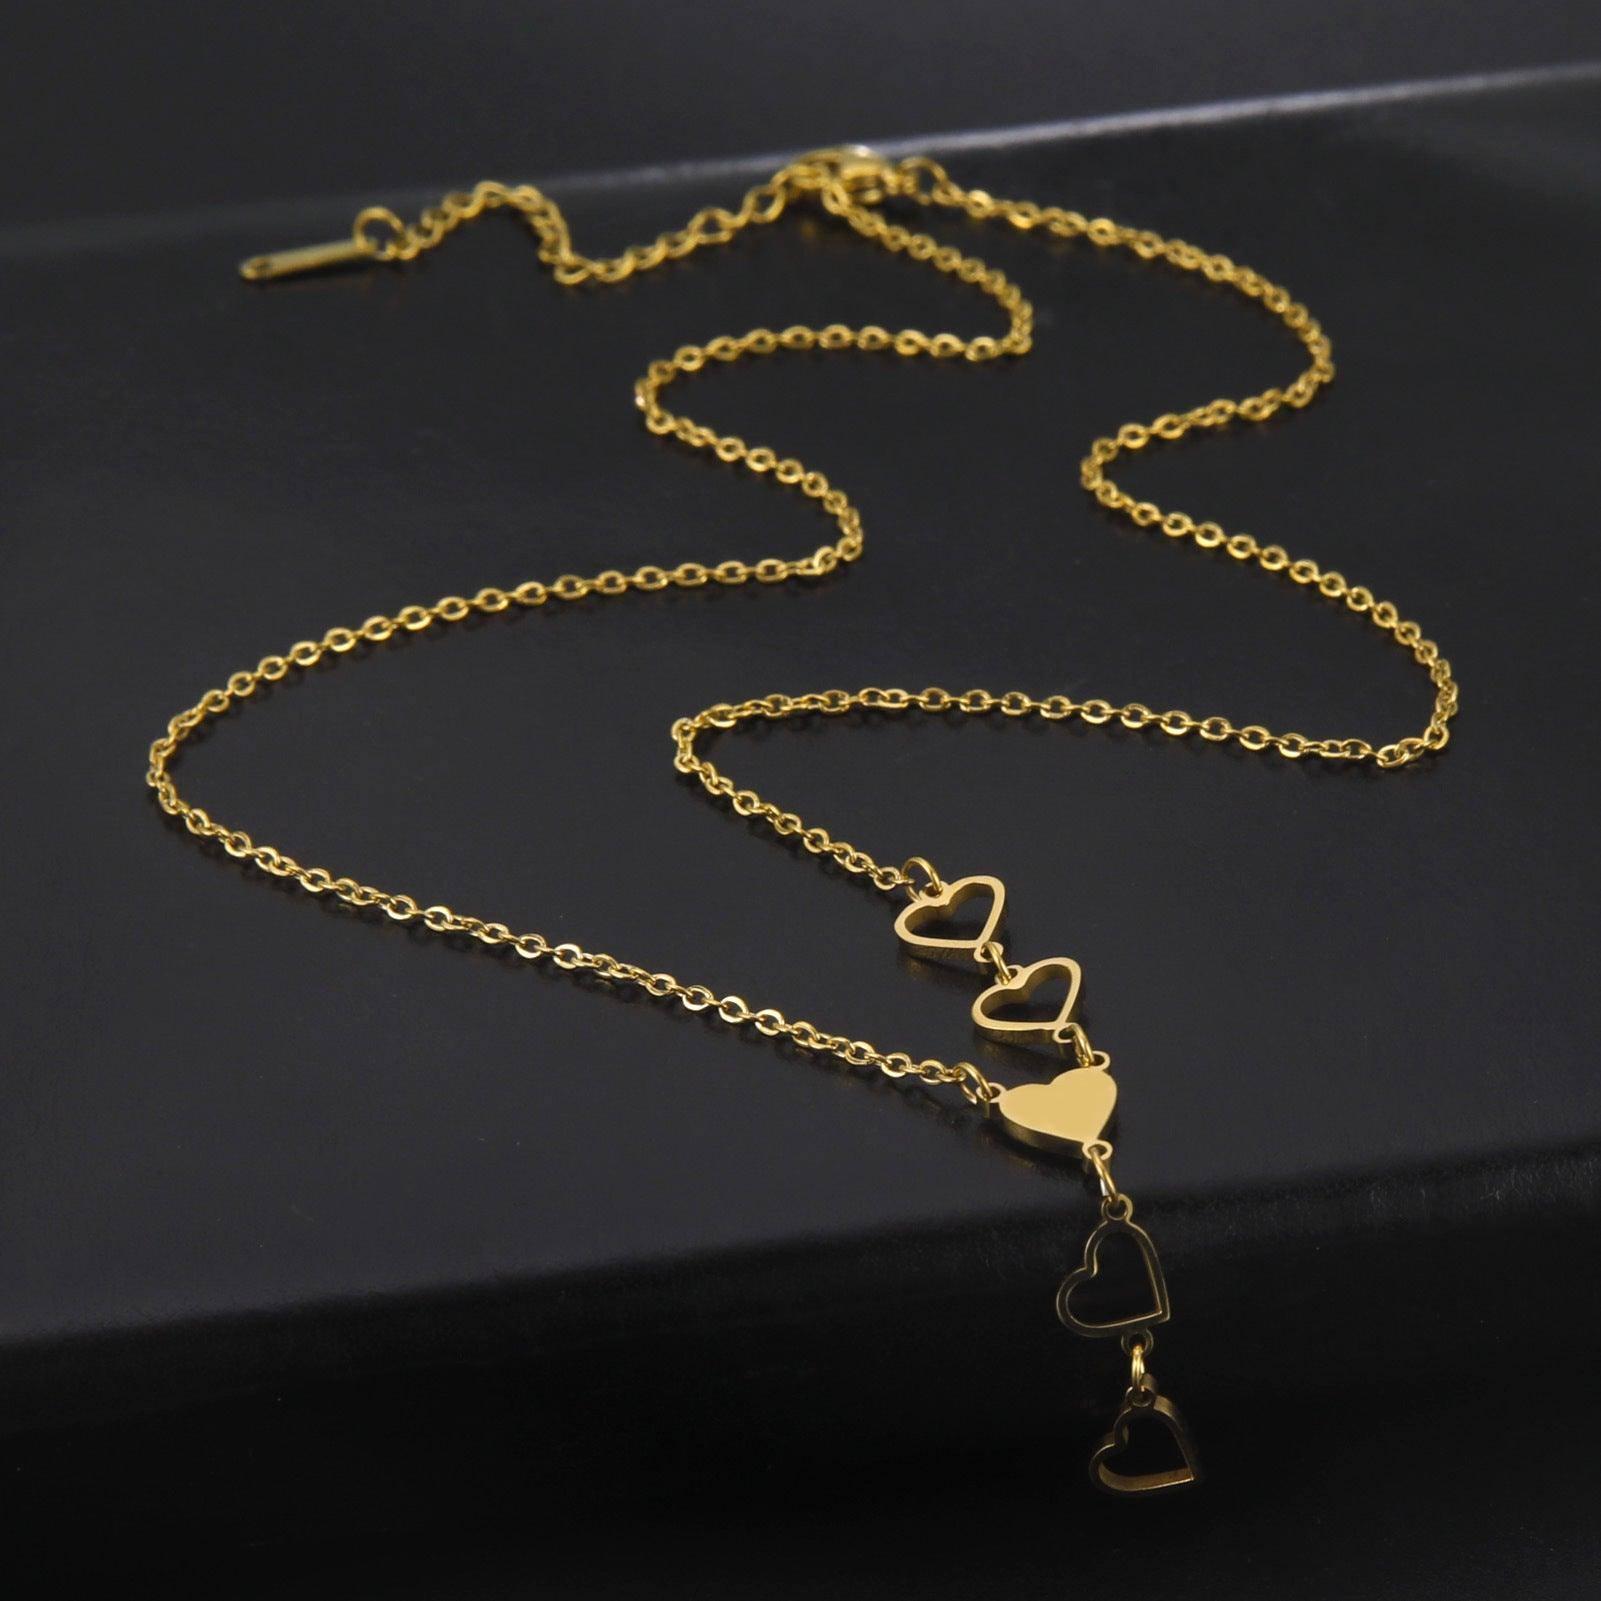 Chic Heart Chain Necklaces in Silver and Gold-3